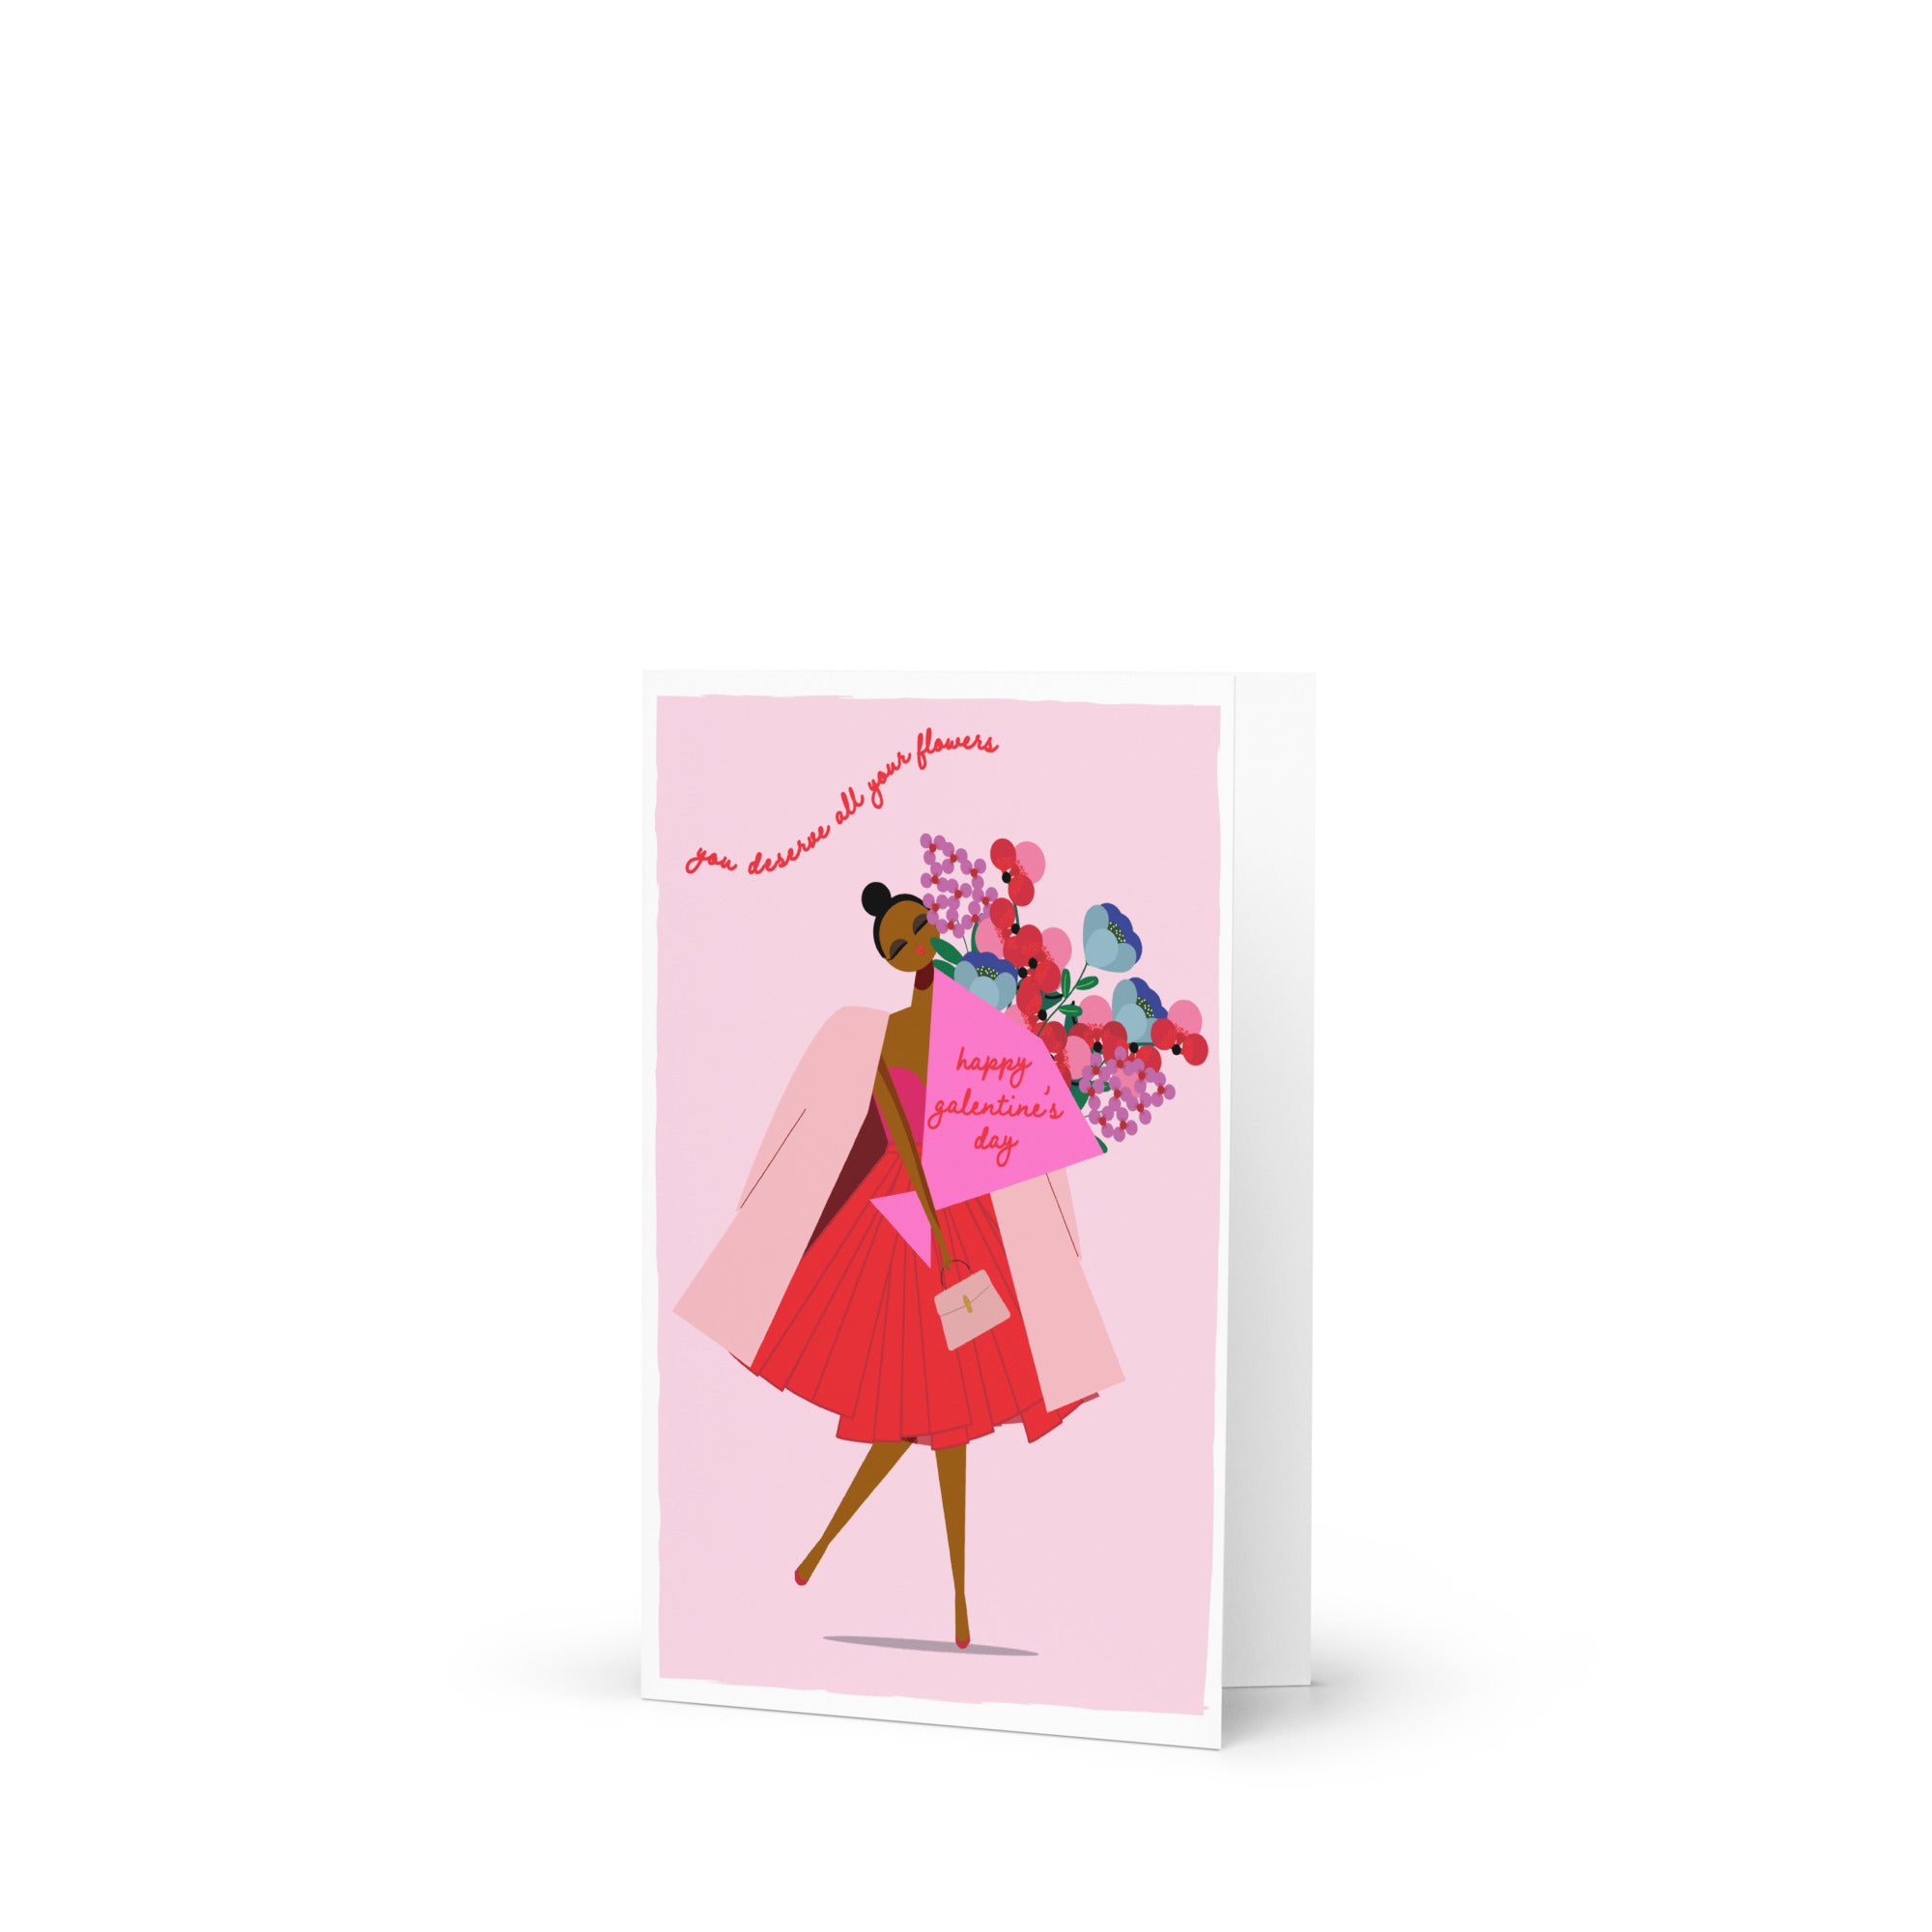 You Deserve Your Flowers card